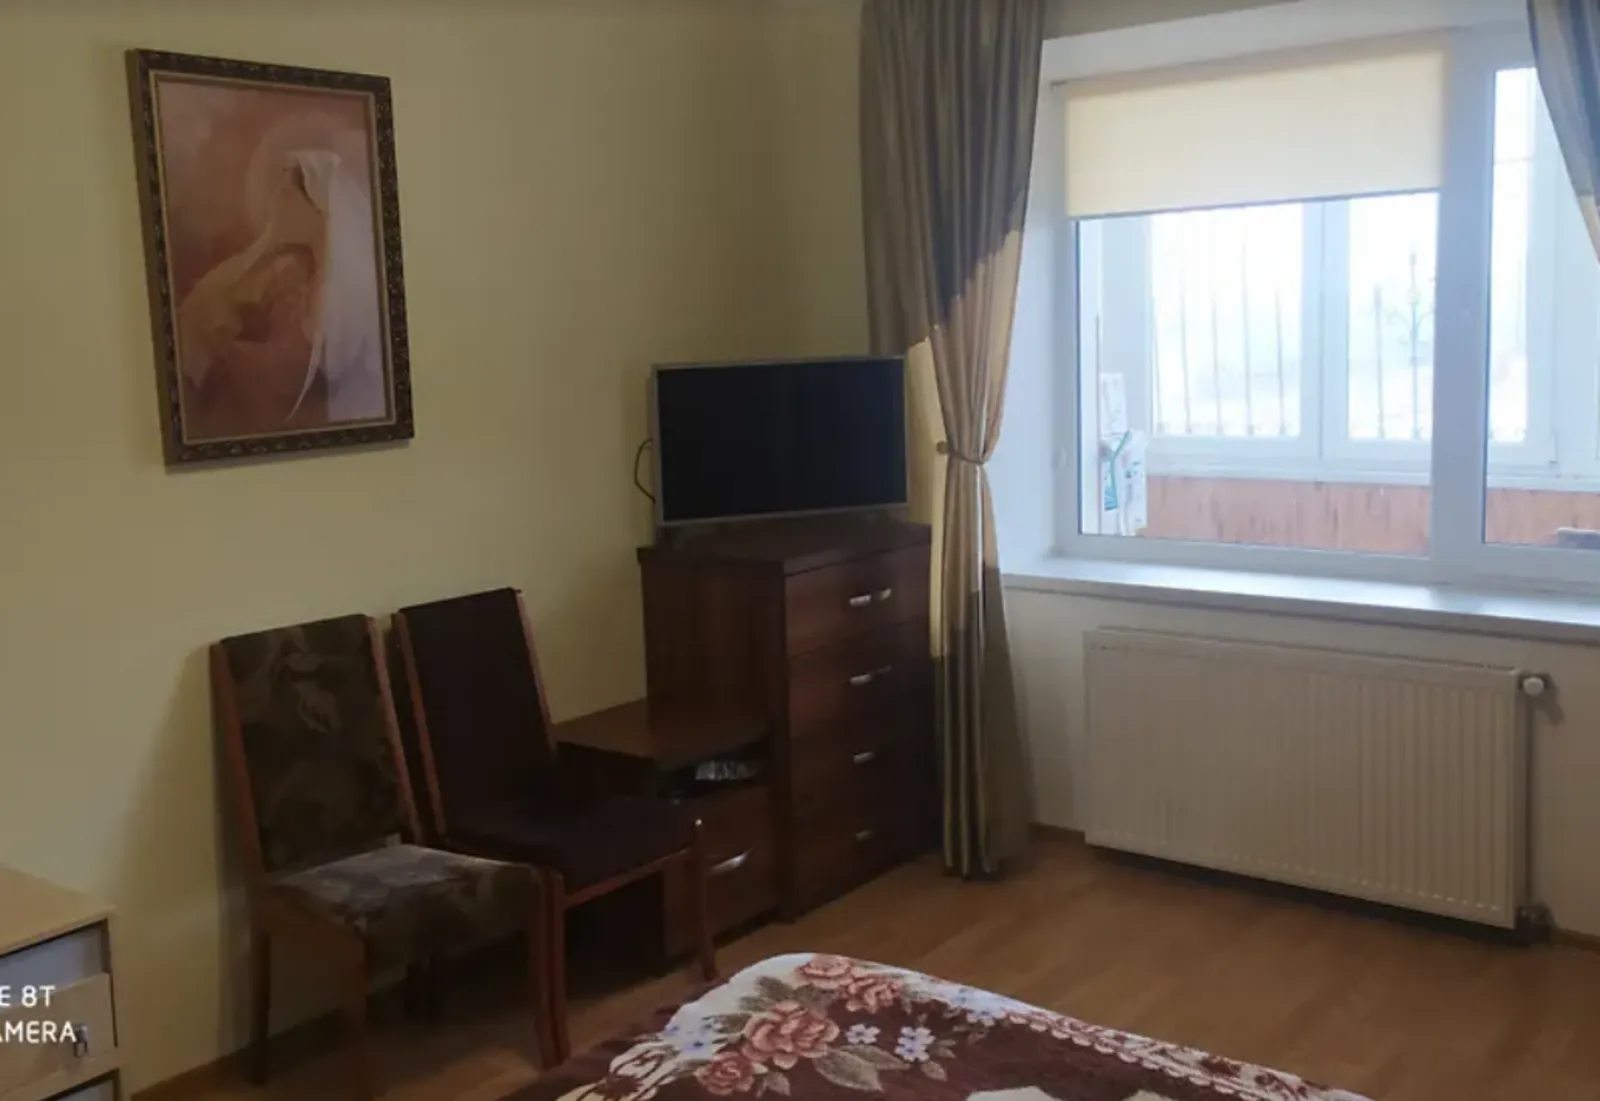 Apartments for sale. 2 rooms, 69 m², 1st floor/5 floors. Bam, Ternopil. 